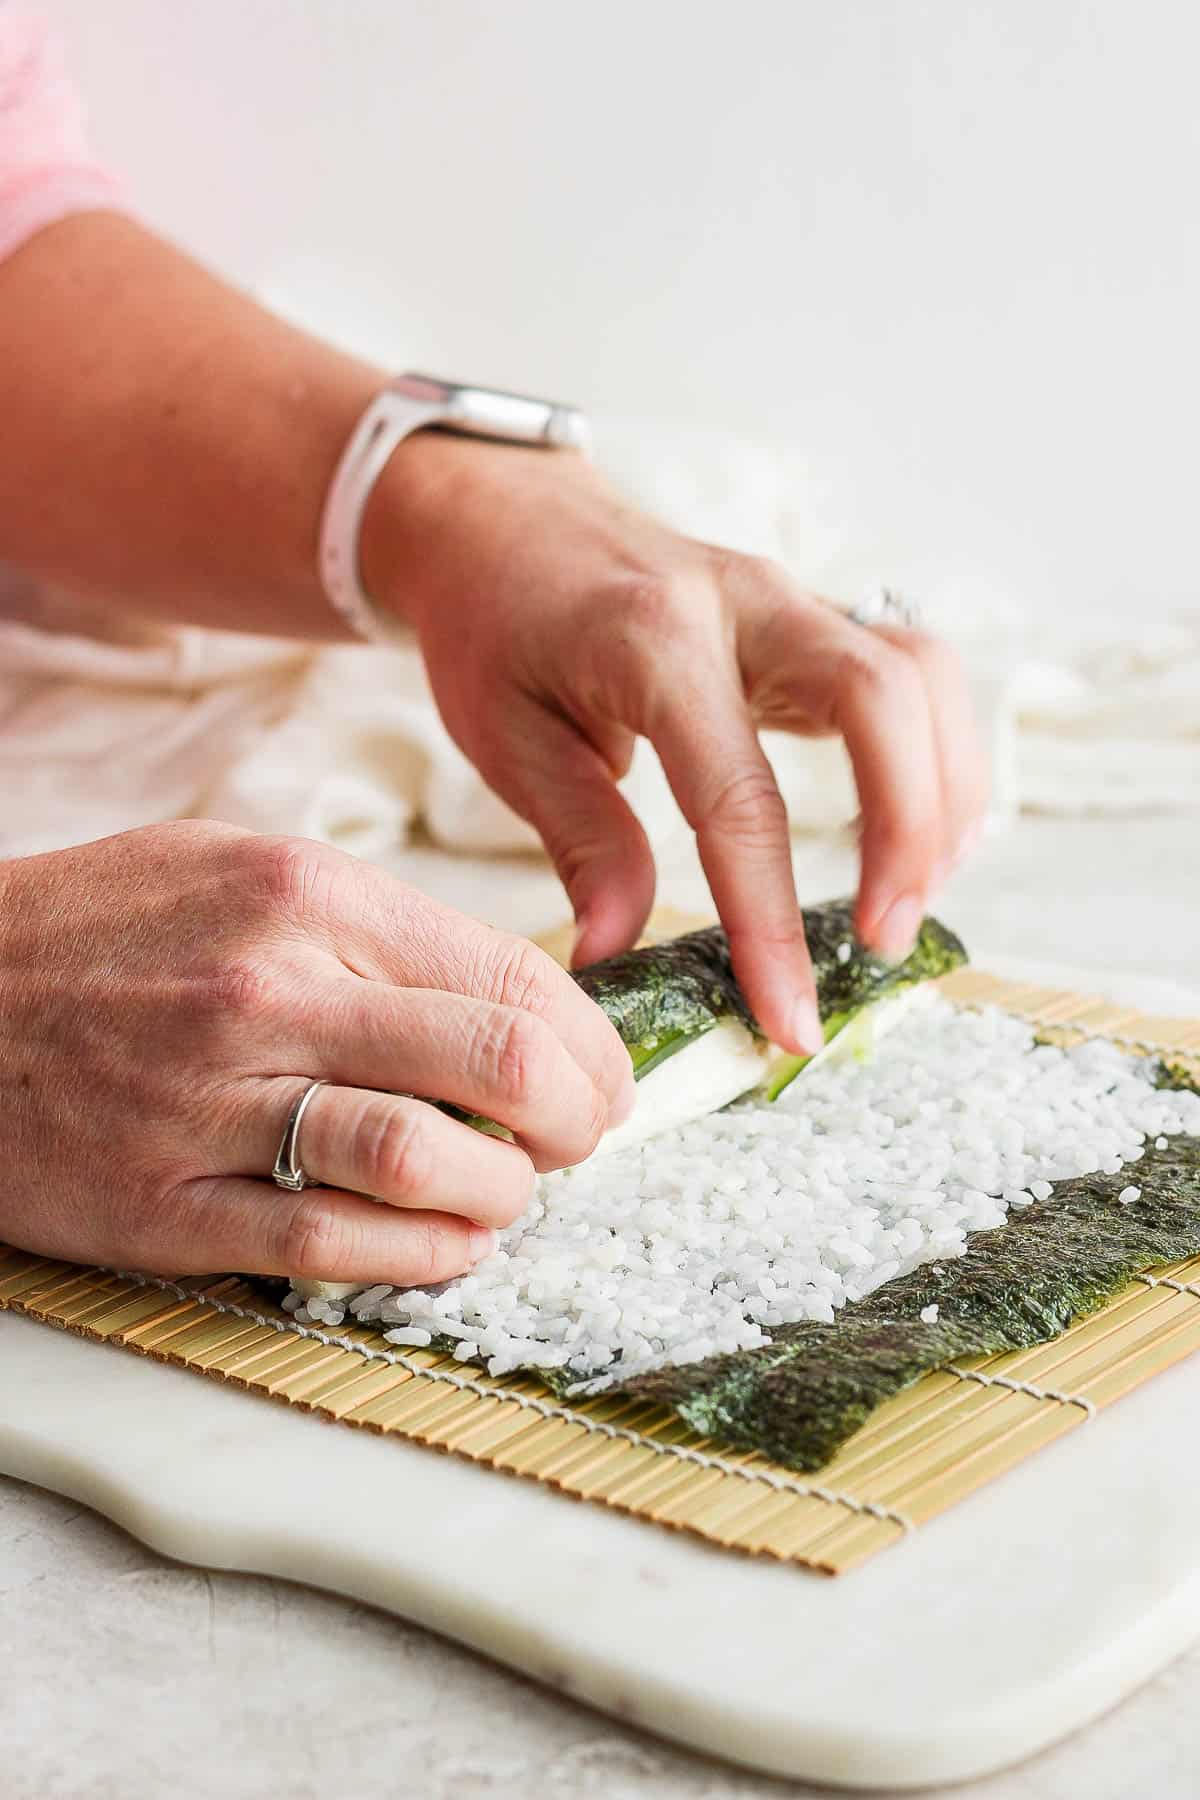 Two hands beginning to roll the nori sheet over the filling ingredients.